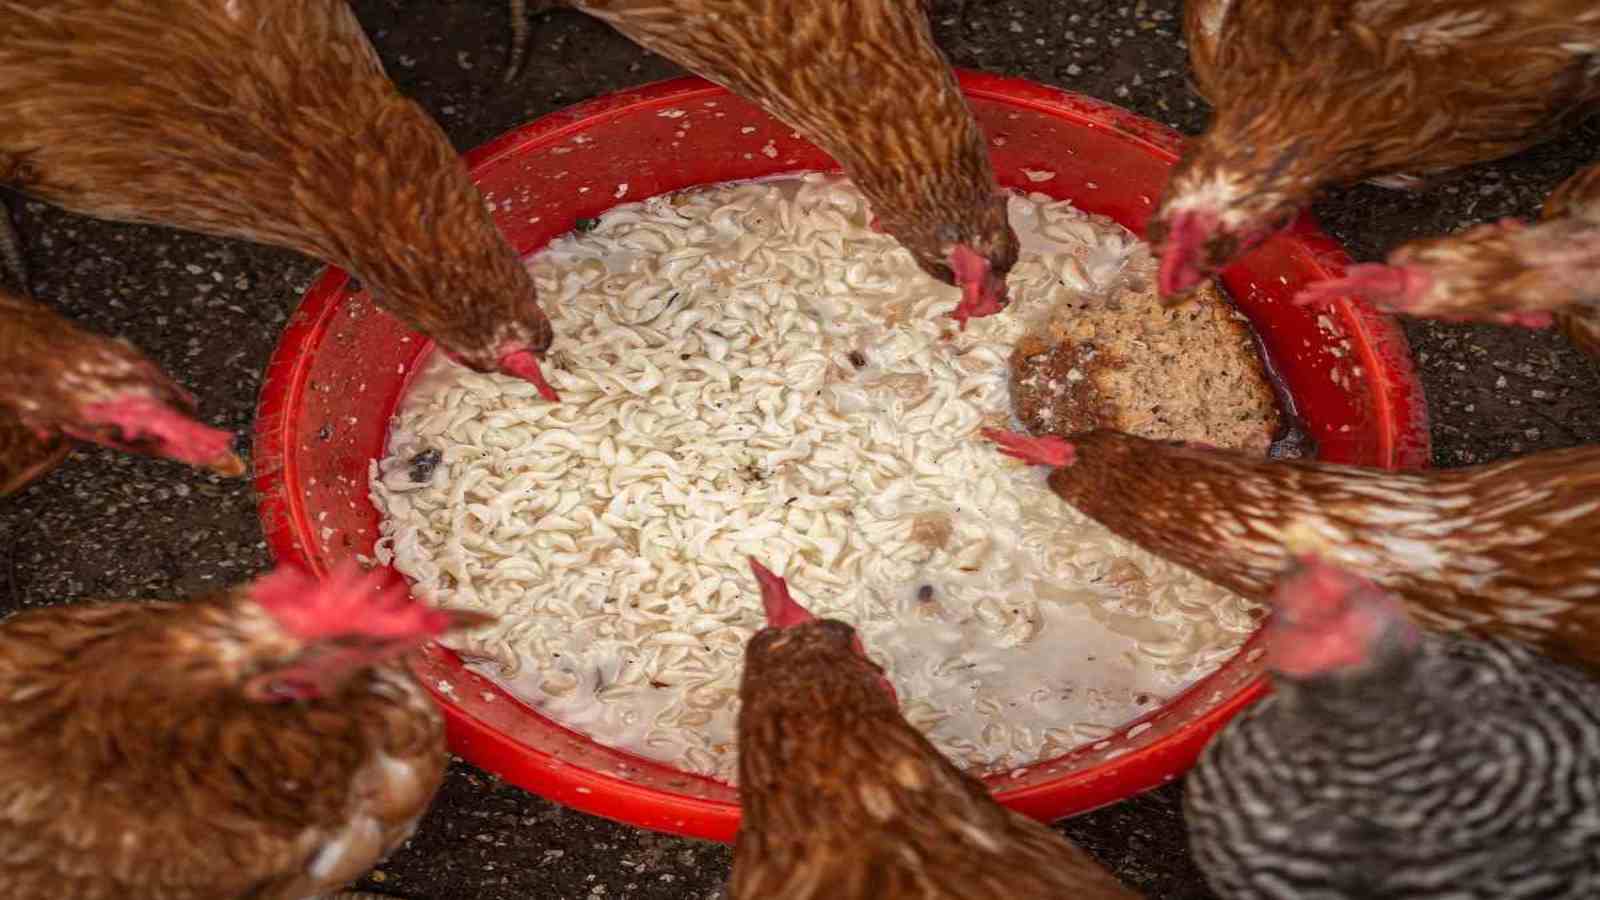 KEBS, Agriculture Ministry report elevated cases of poultry feed contamination